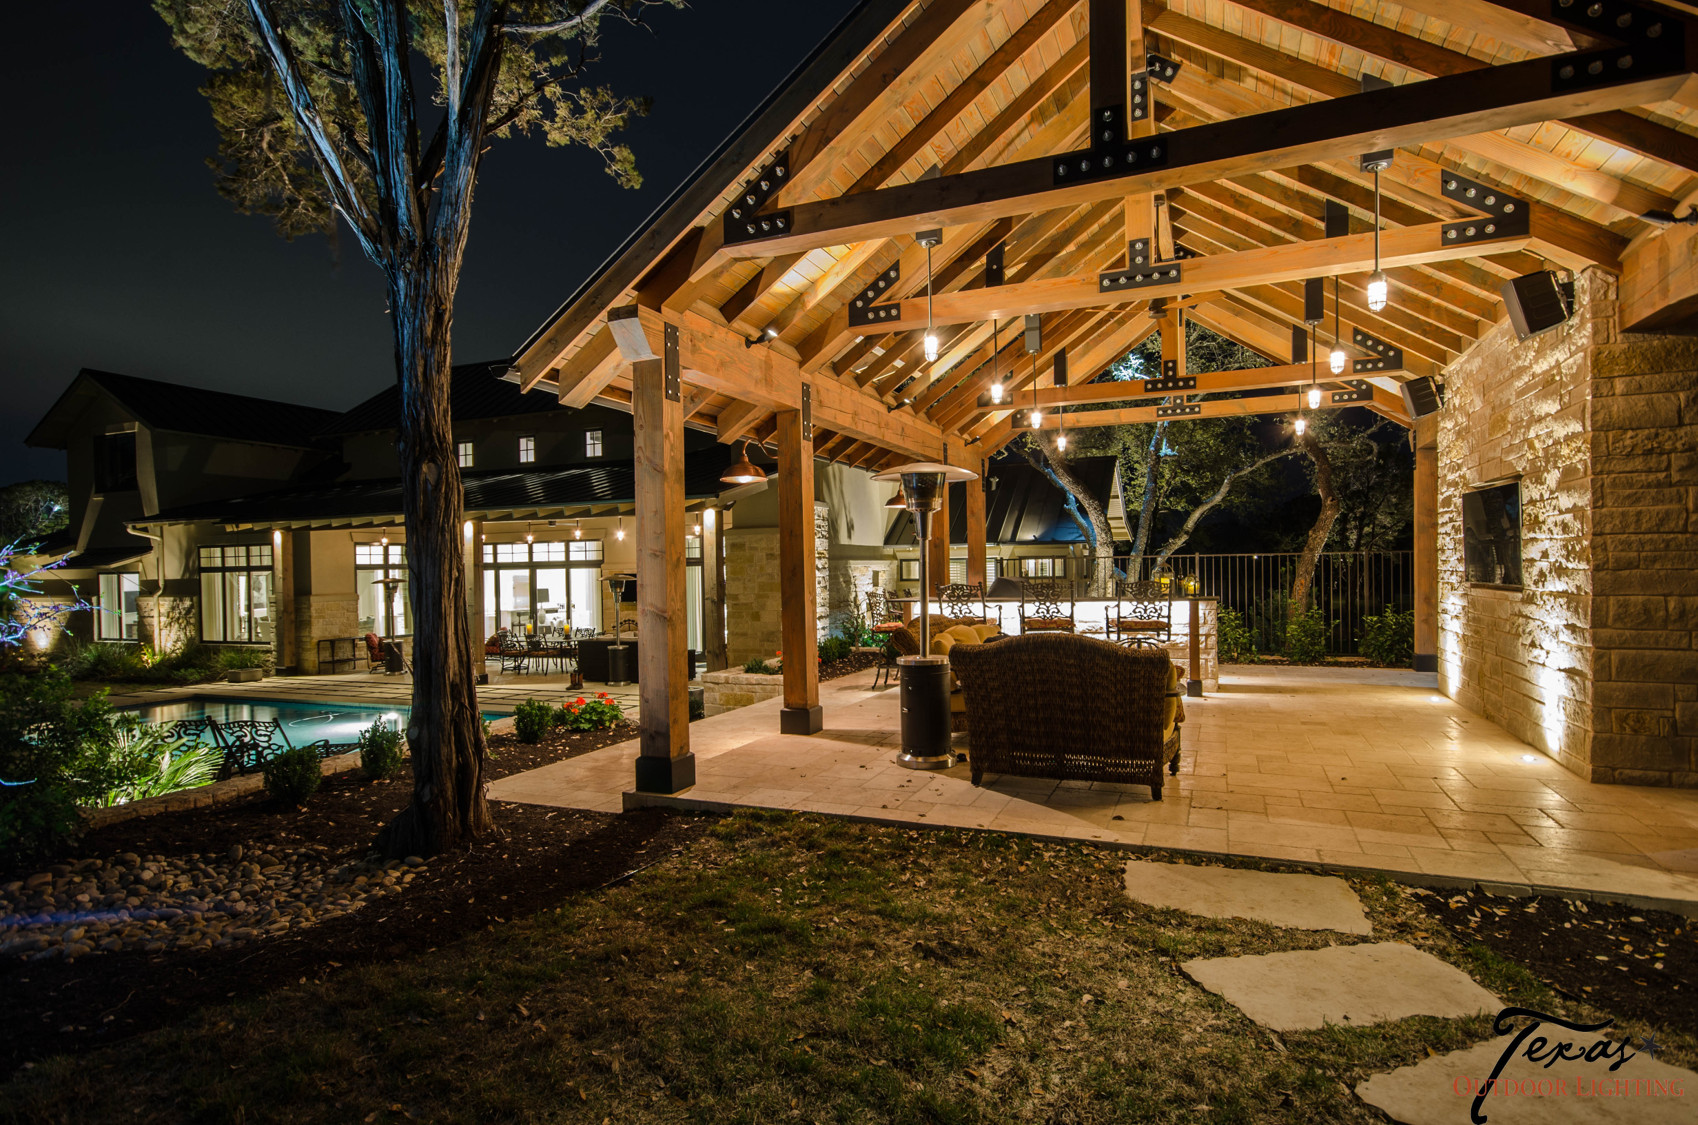 Terrace Landscape Lighting
 Outdoor Lighting for your Outdoor Living Space & Patio